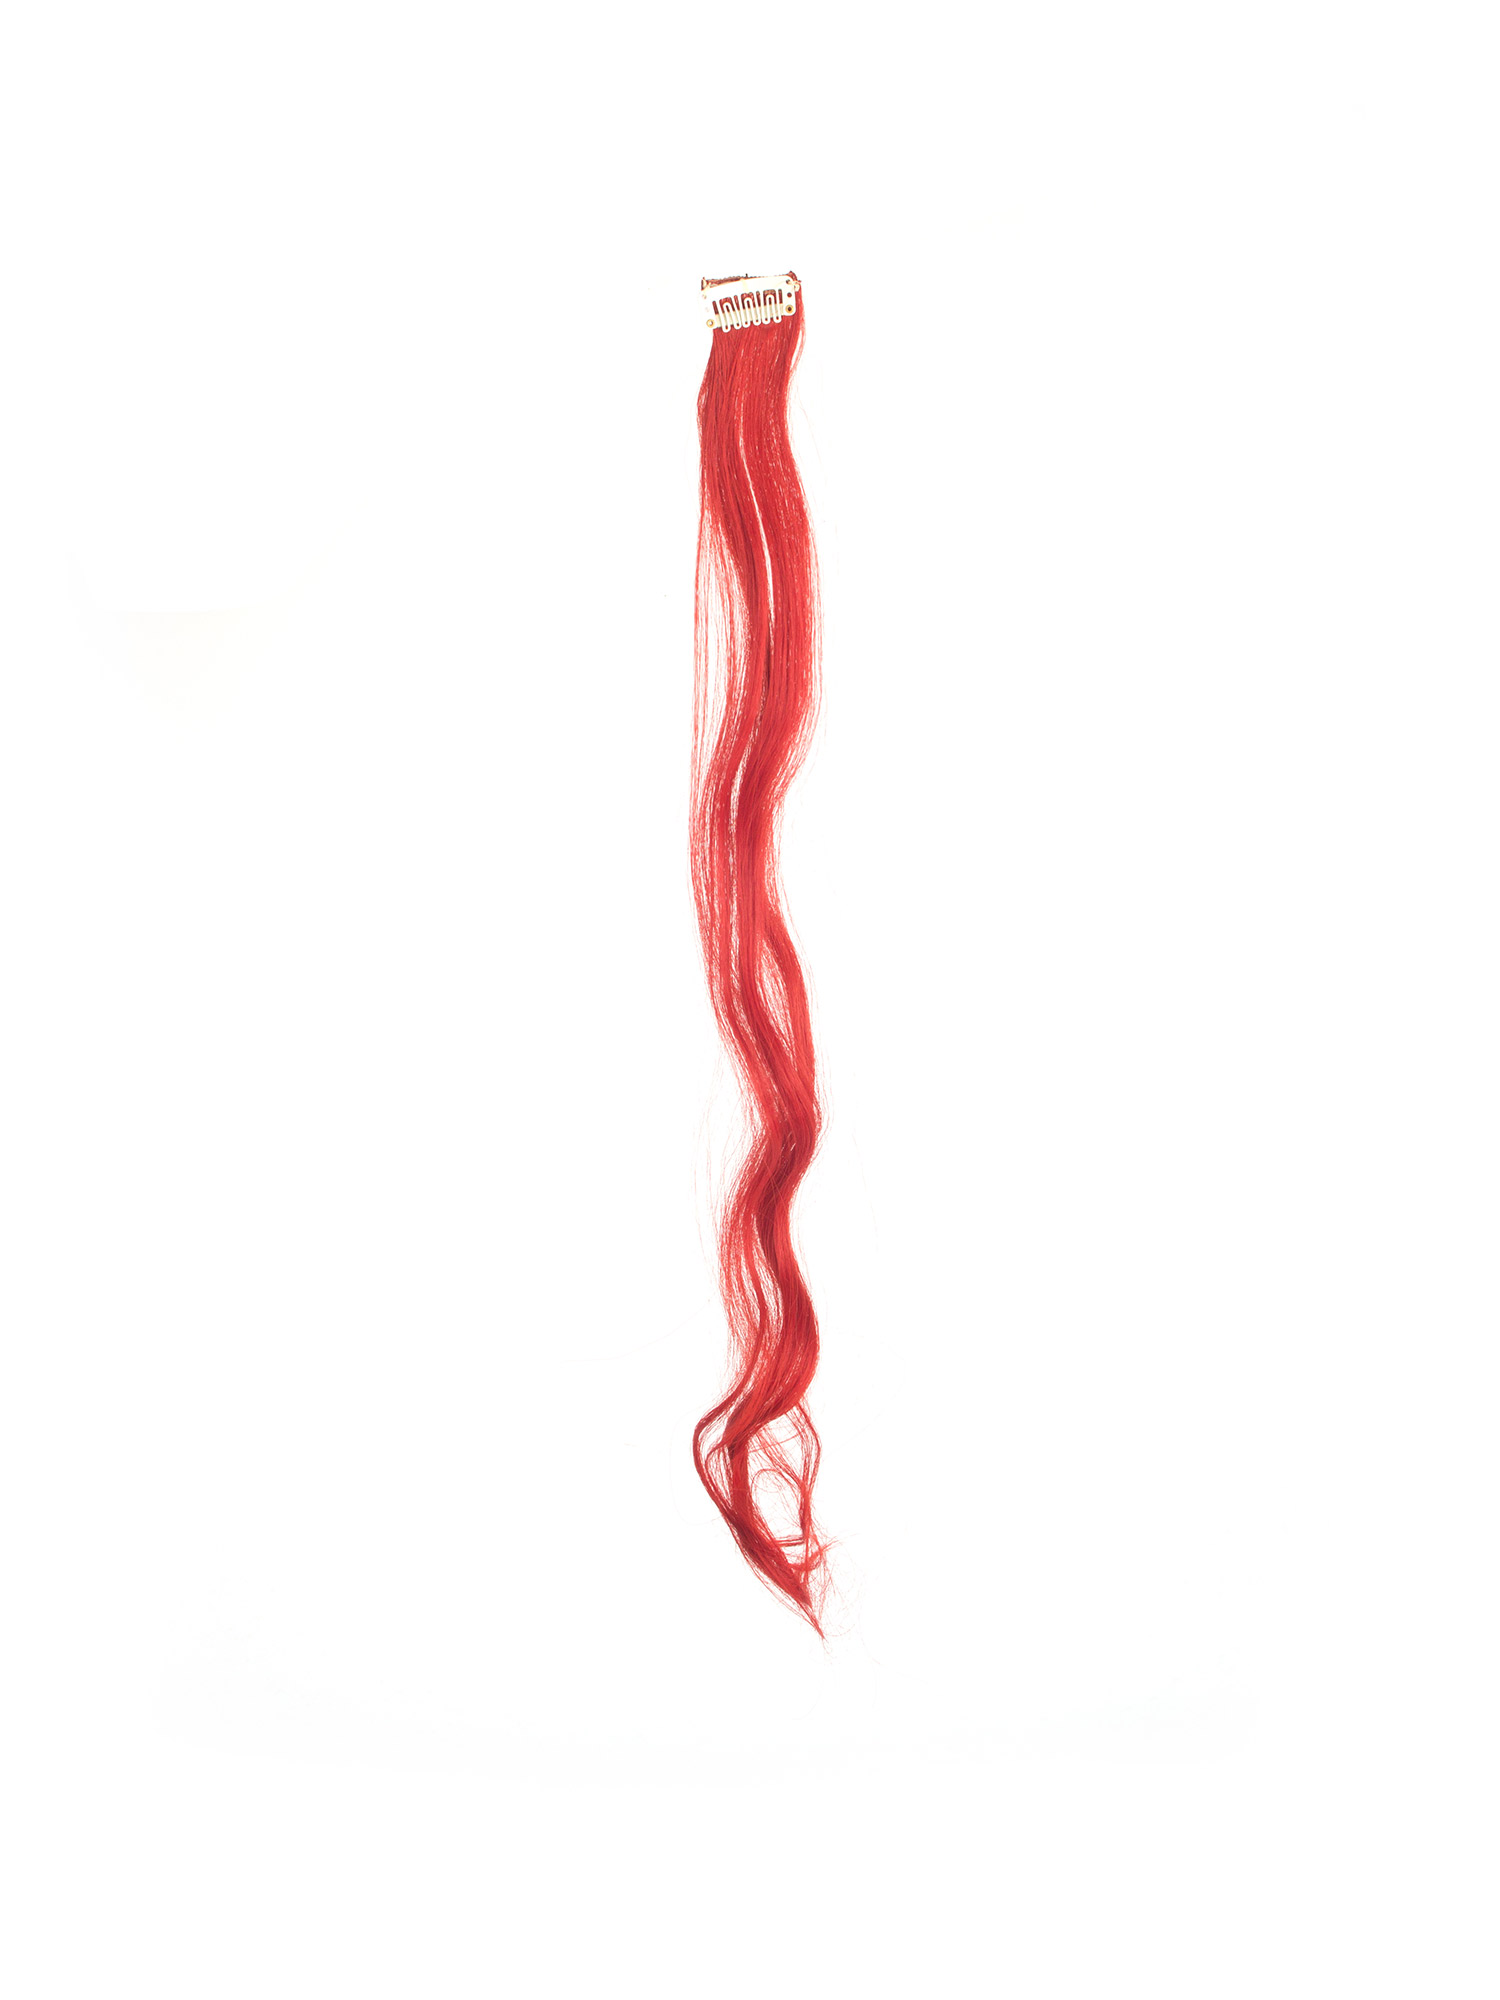 LELINTA Clip In On Colorful Hair piece Synthetic Curly Silk Soft Hair Extensions Highlight - image 4 of 5